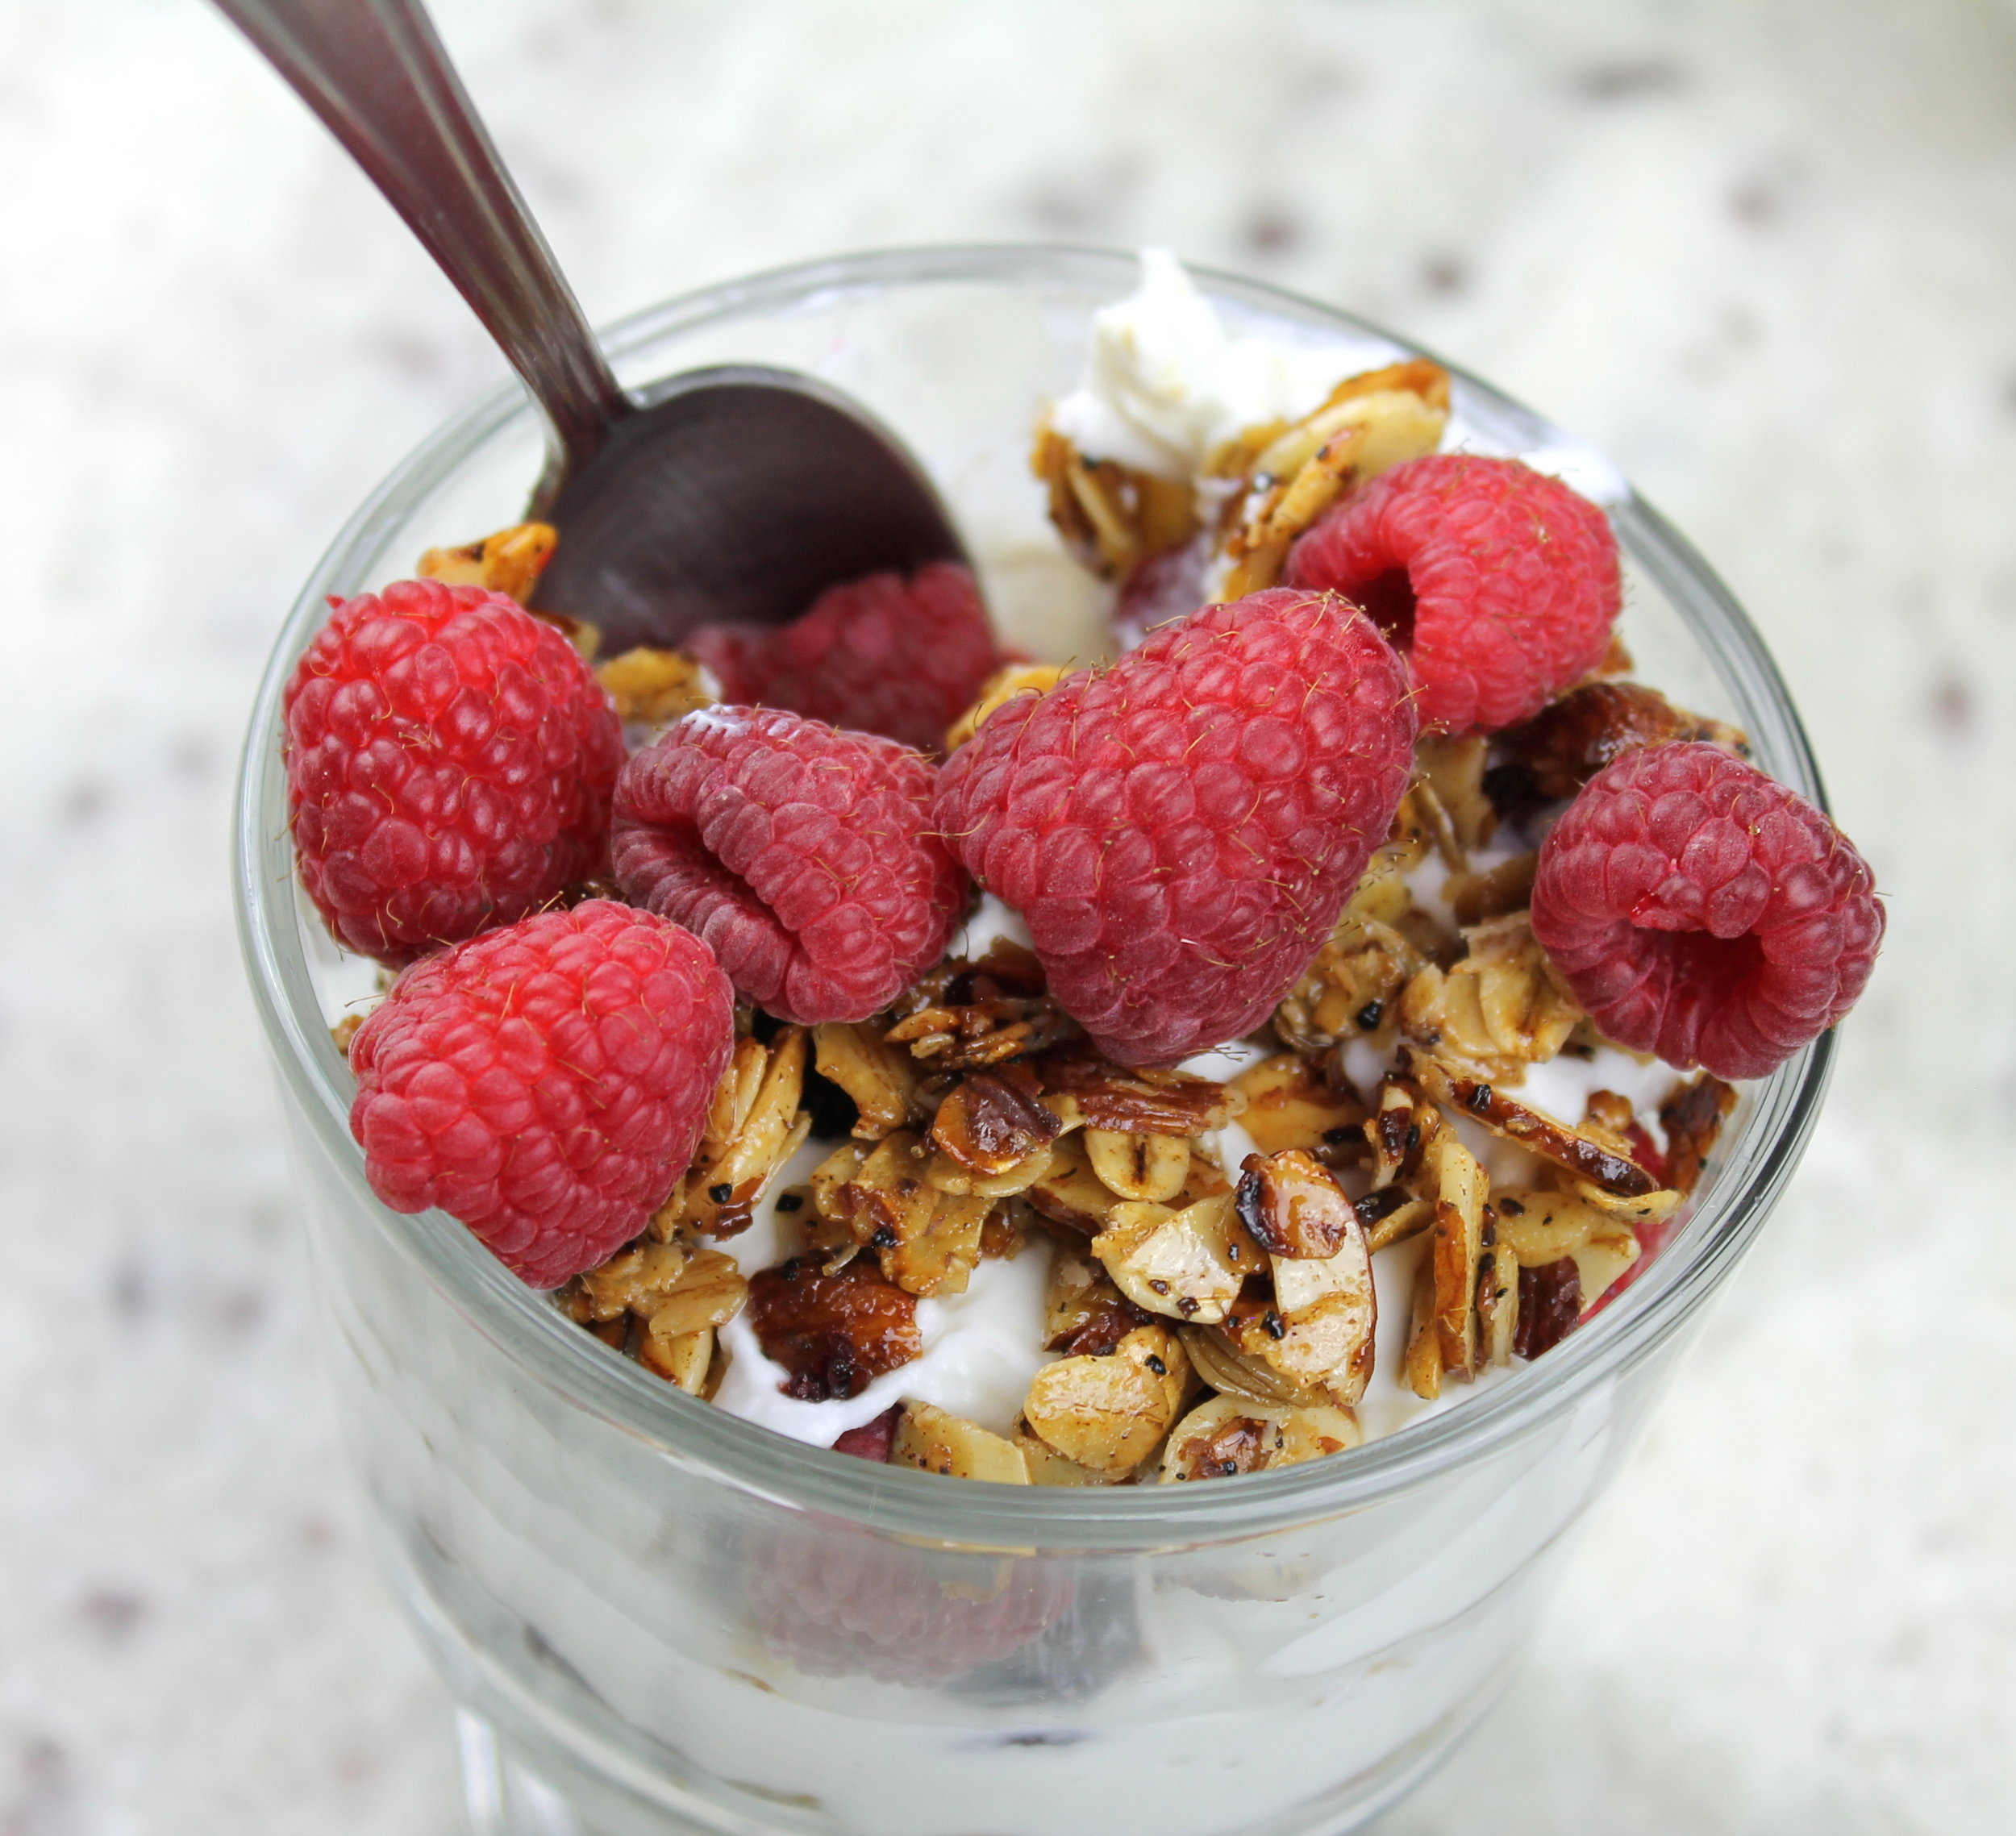 Step up your breakfast game with yogurt parfait : quick, nutritious, and easy to assemble!